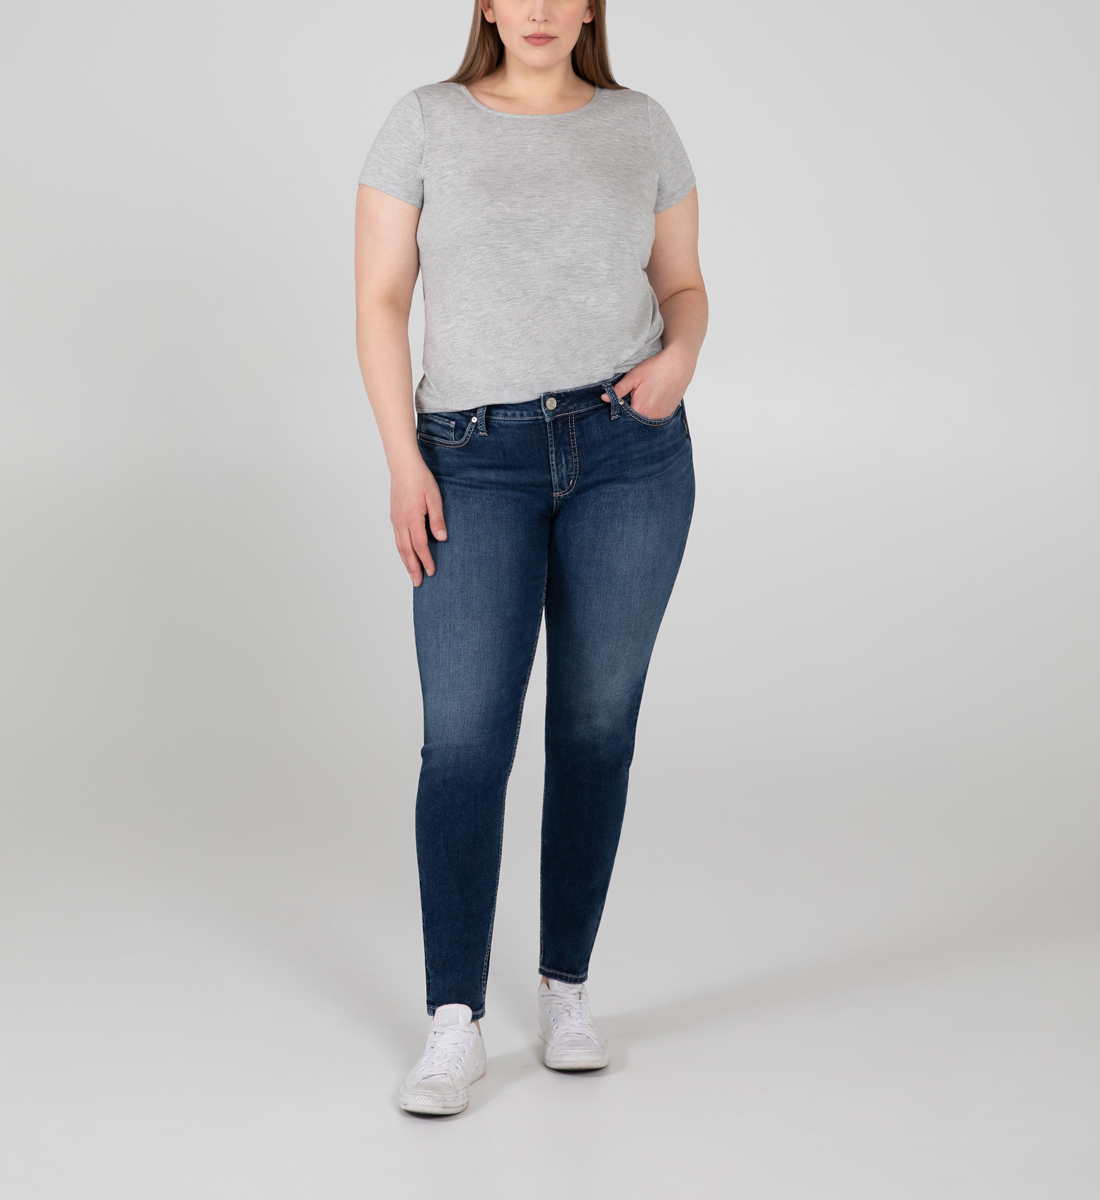 Silver Jeans Elyse Mid Rise Skinny Jeans Plus Size